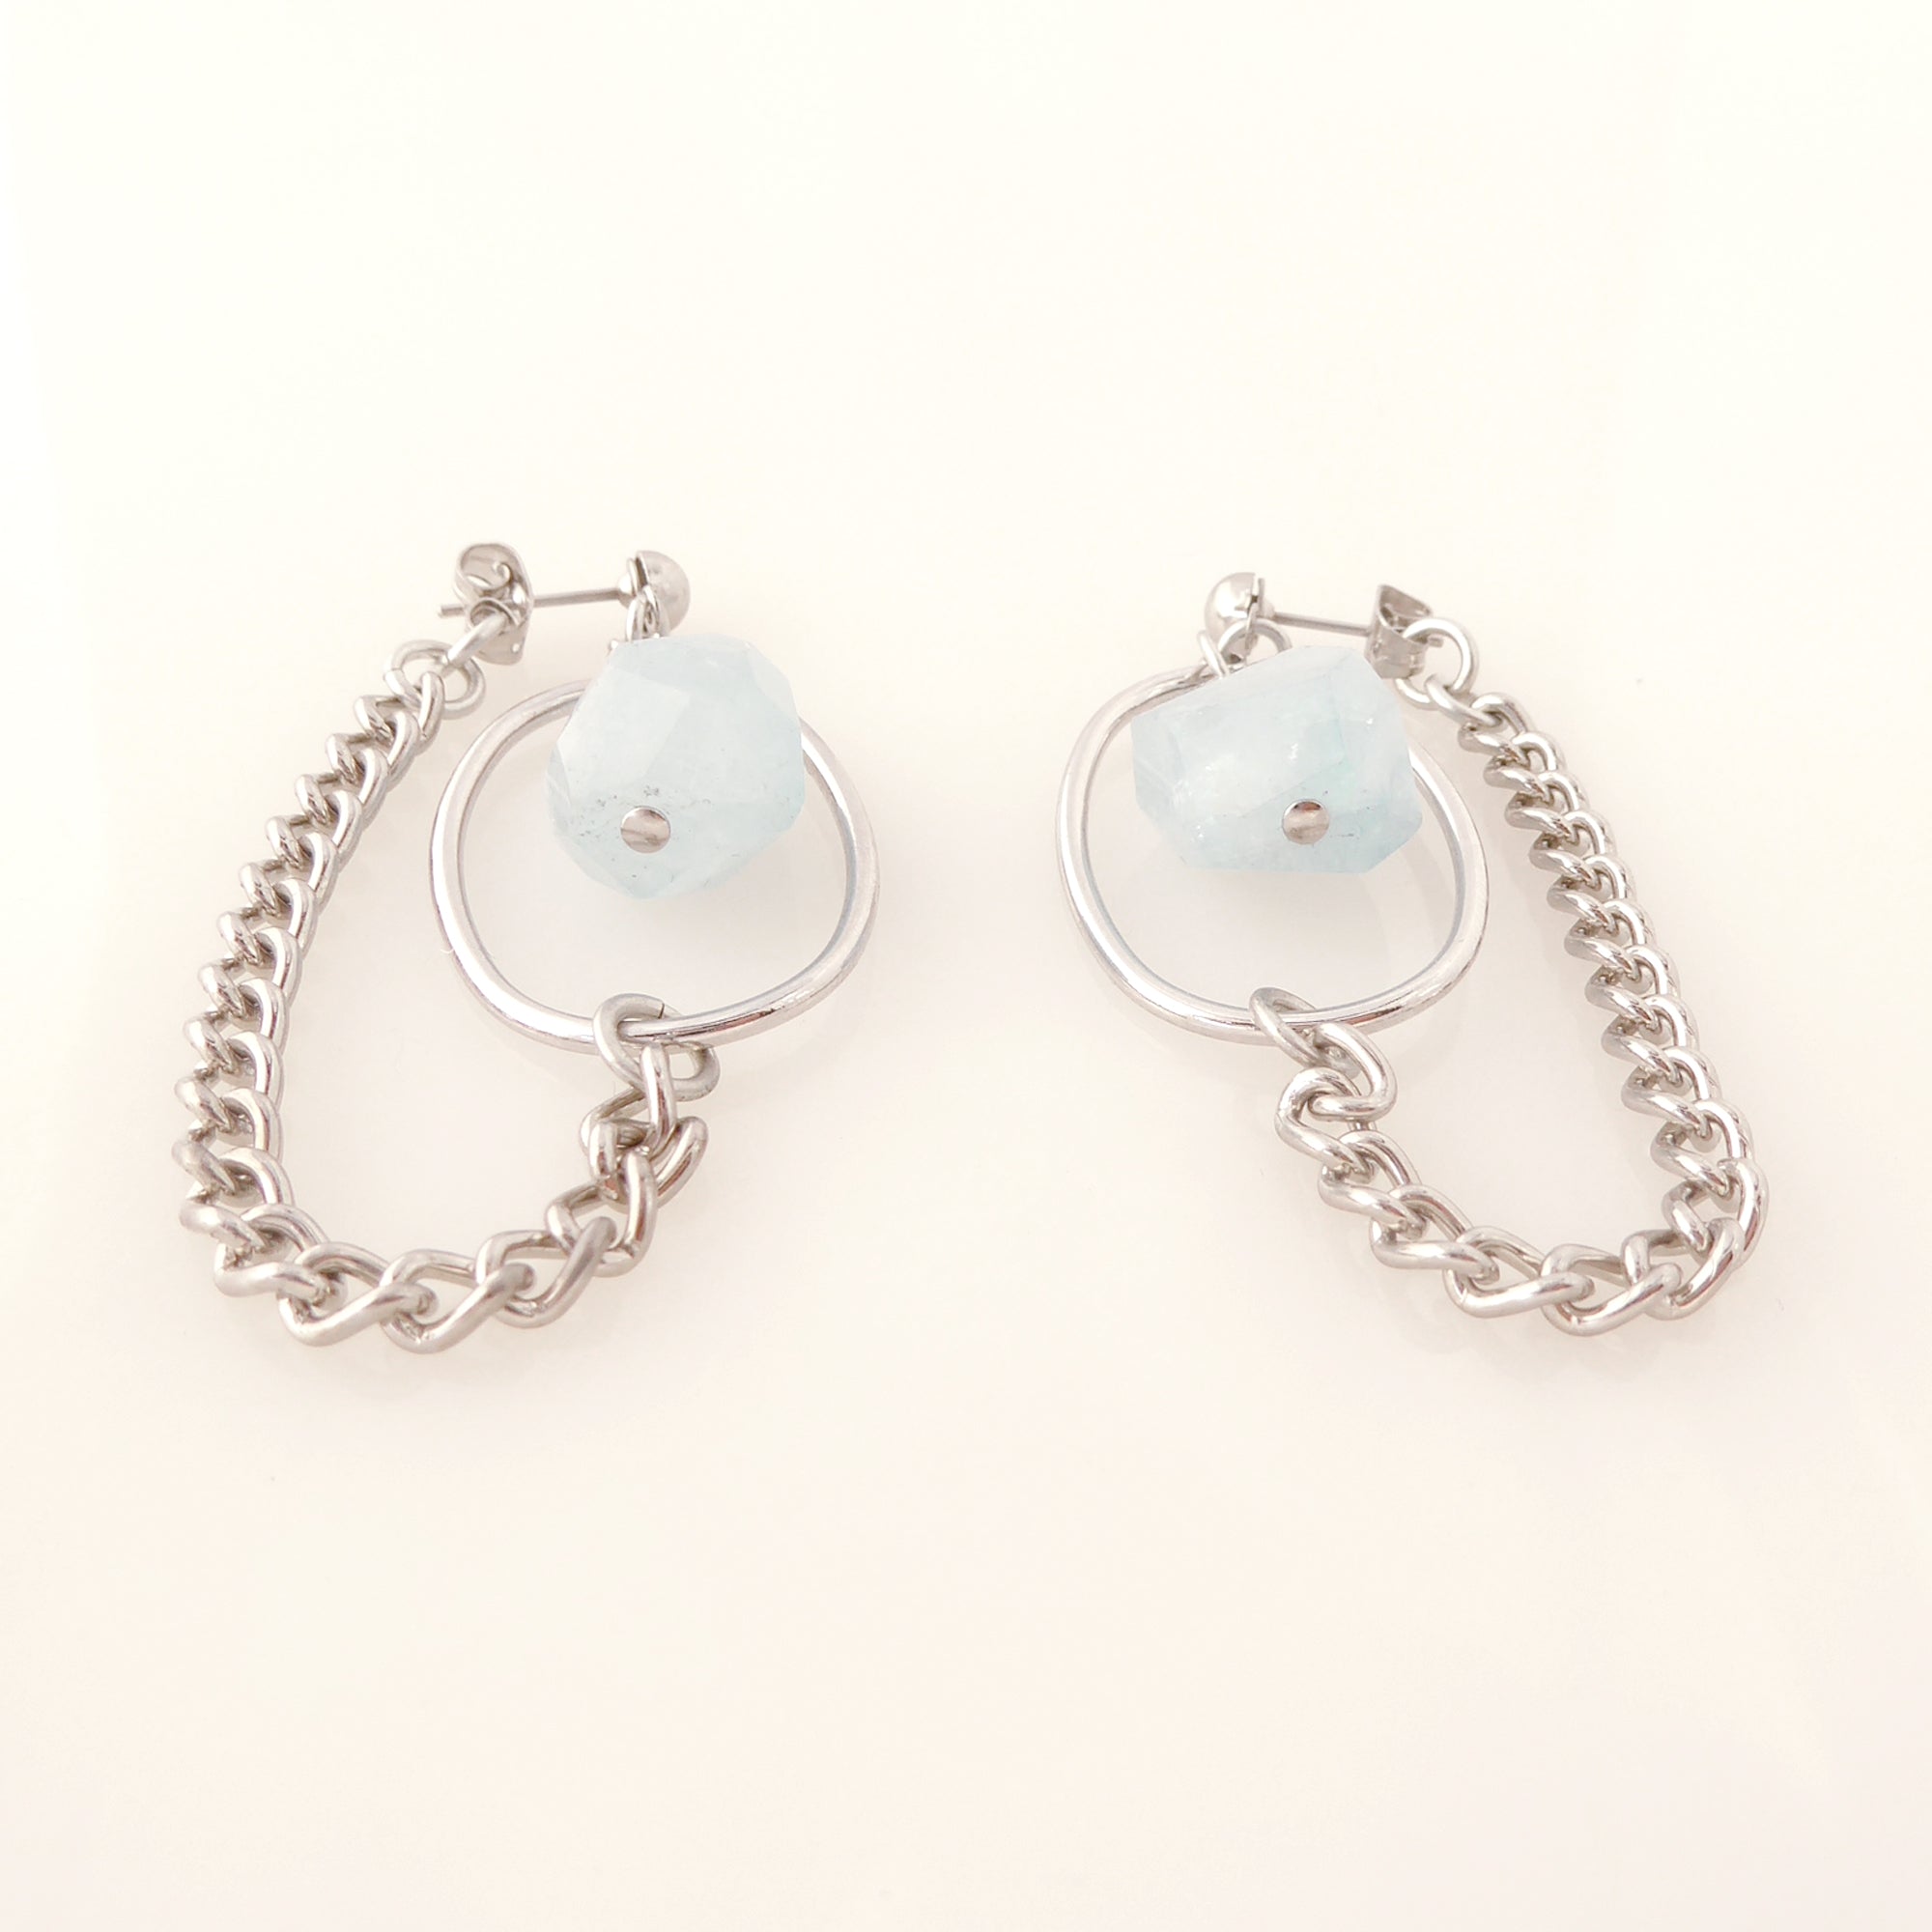 Silver saturn earrings in aquamarine by Jenny Dayco 3